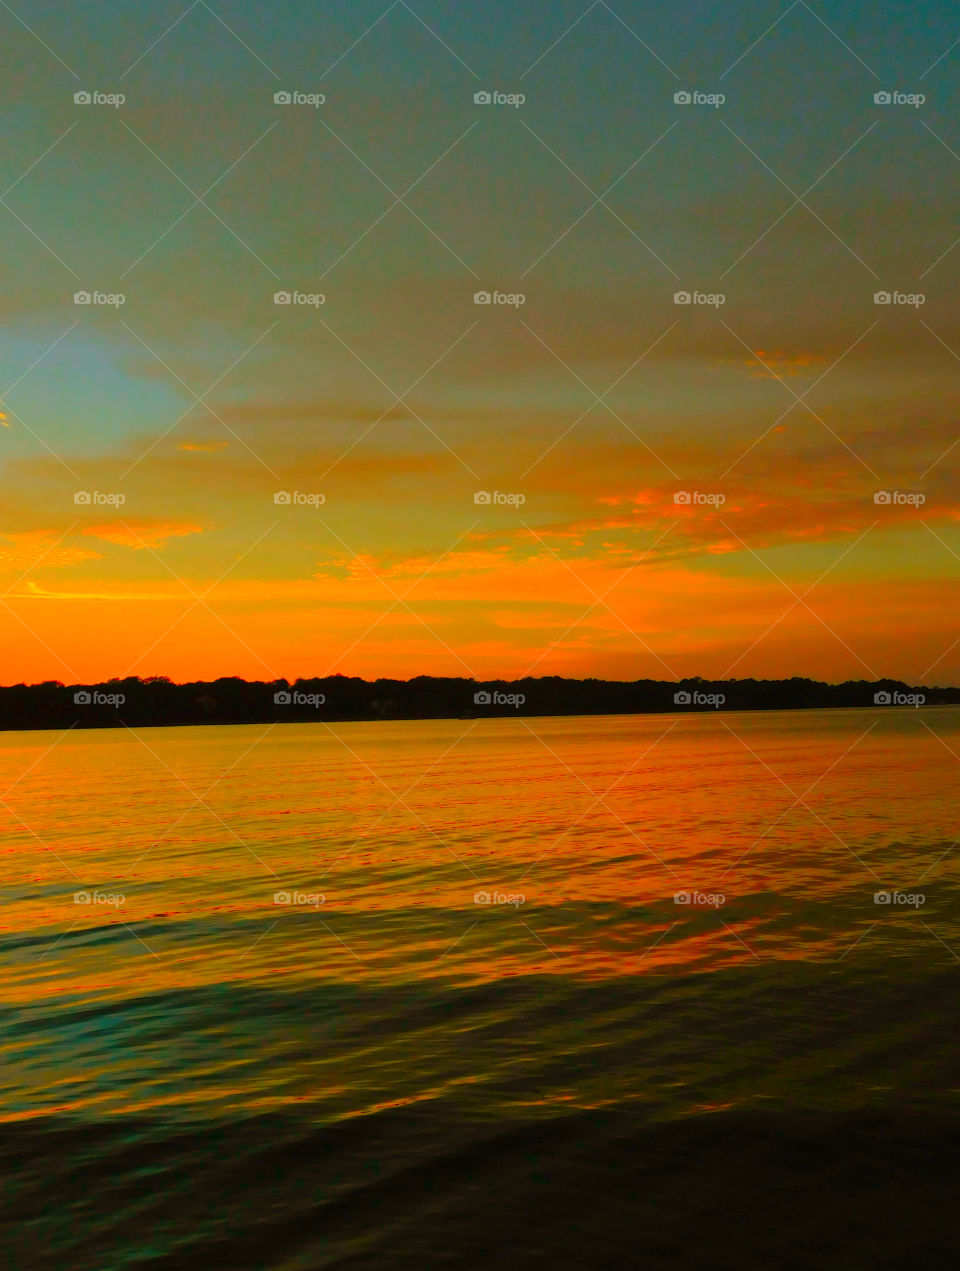 Golden Yellow Blushing Sunset!
The sunset glimmers across the bayou waterway as the sun descends below the horizon!